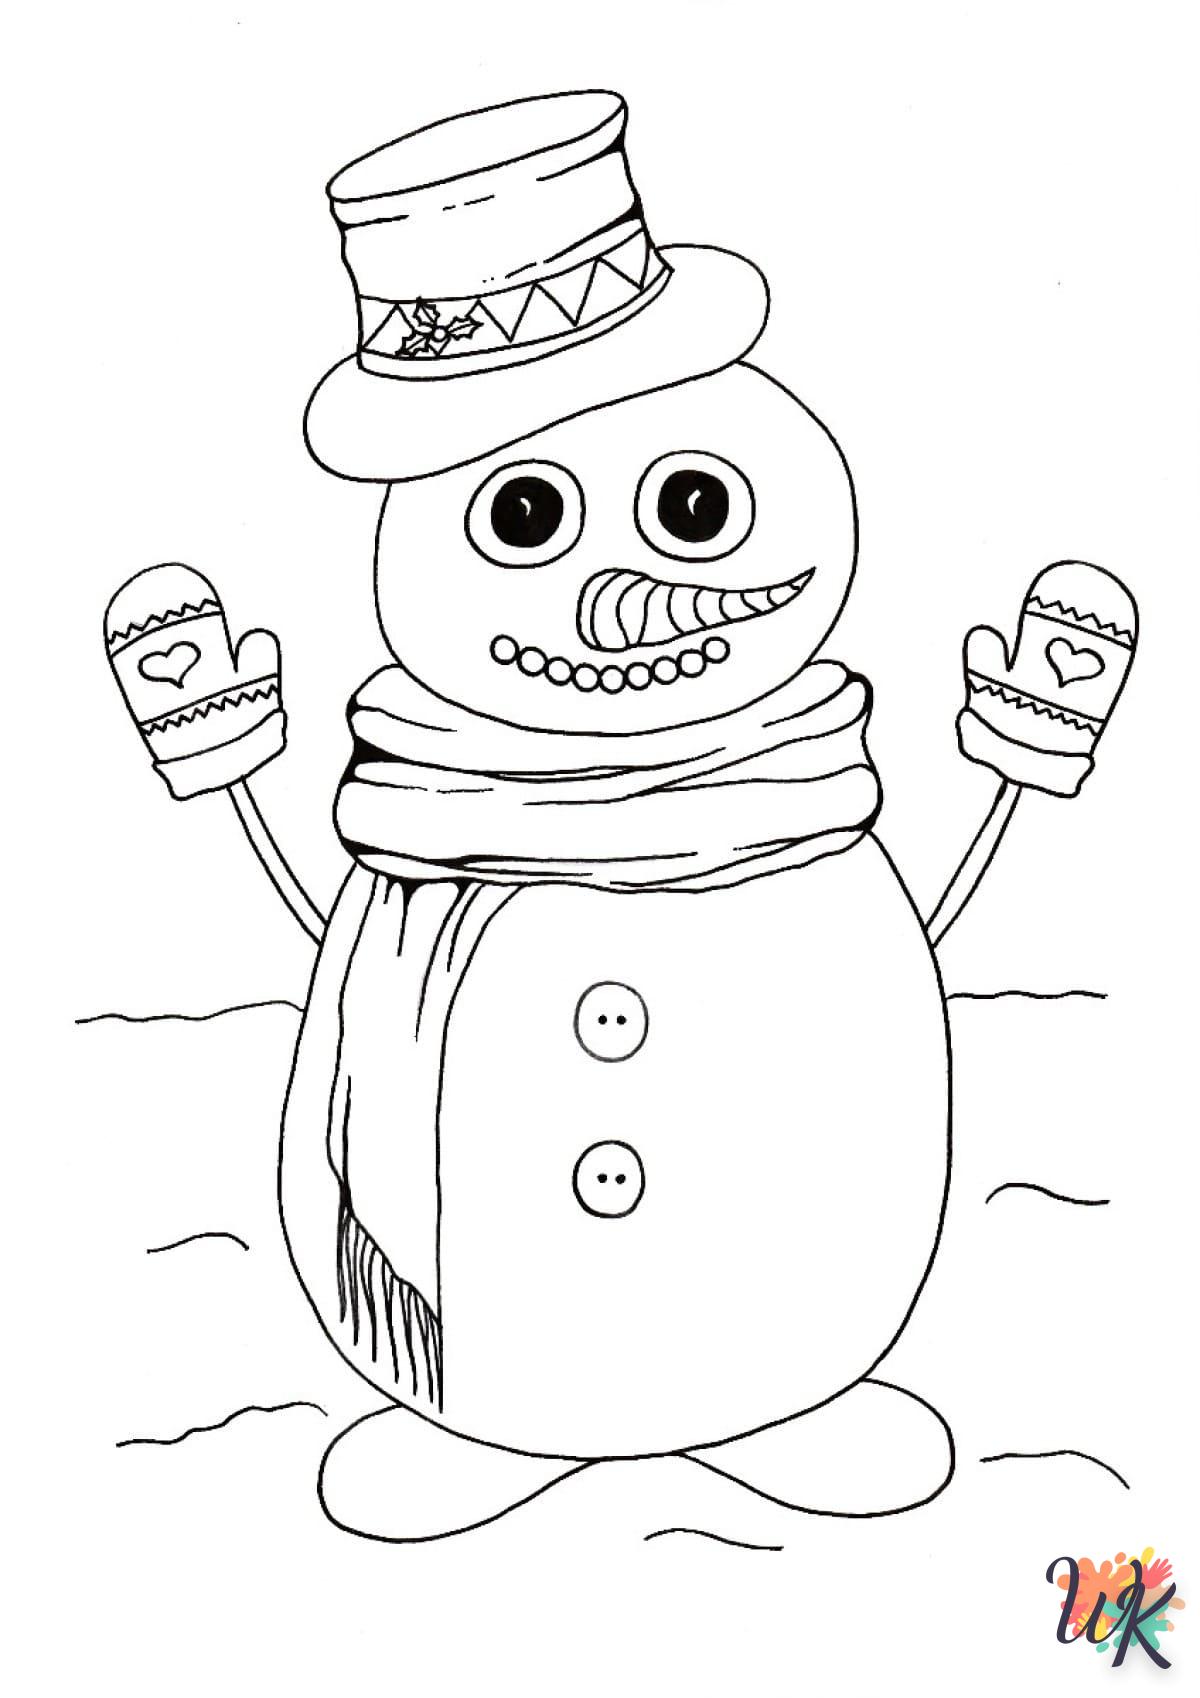 Snowman coloring page for baby to print 1